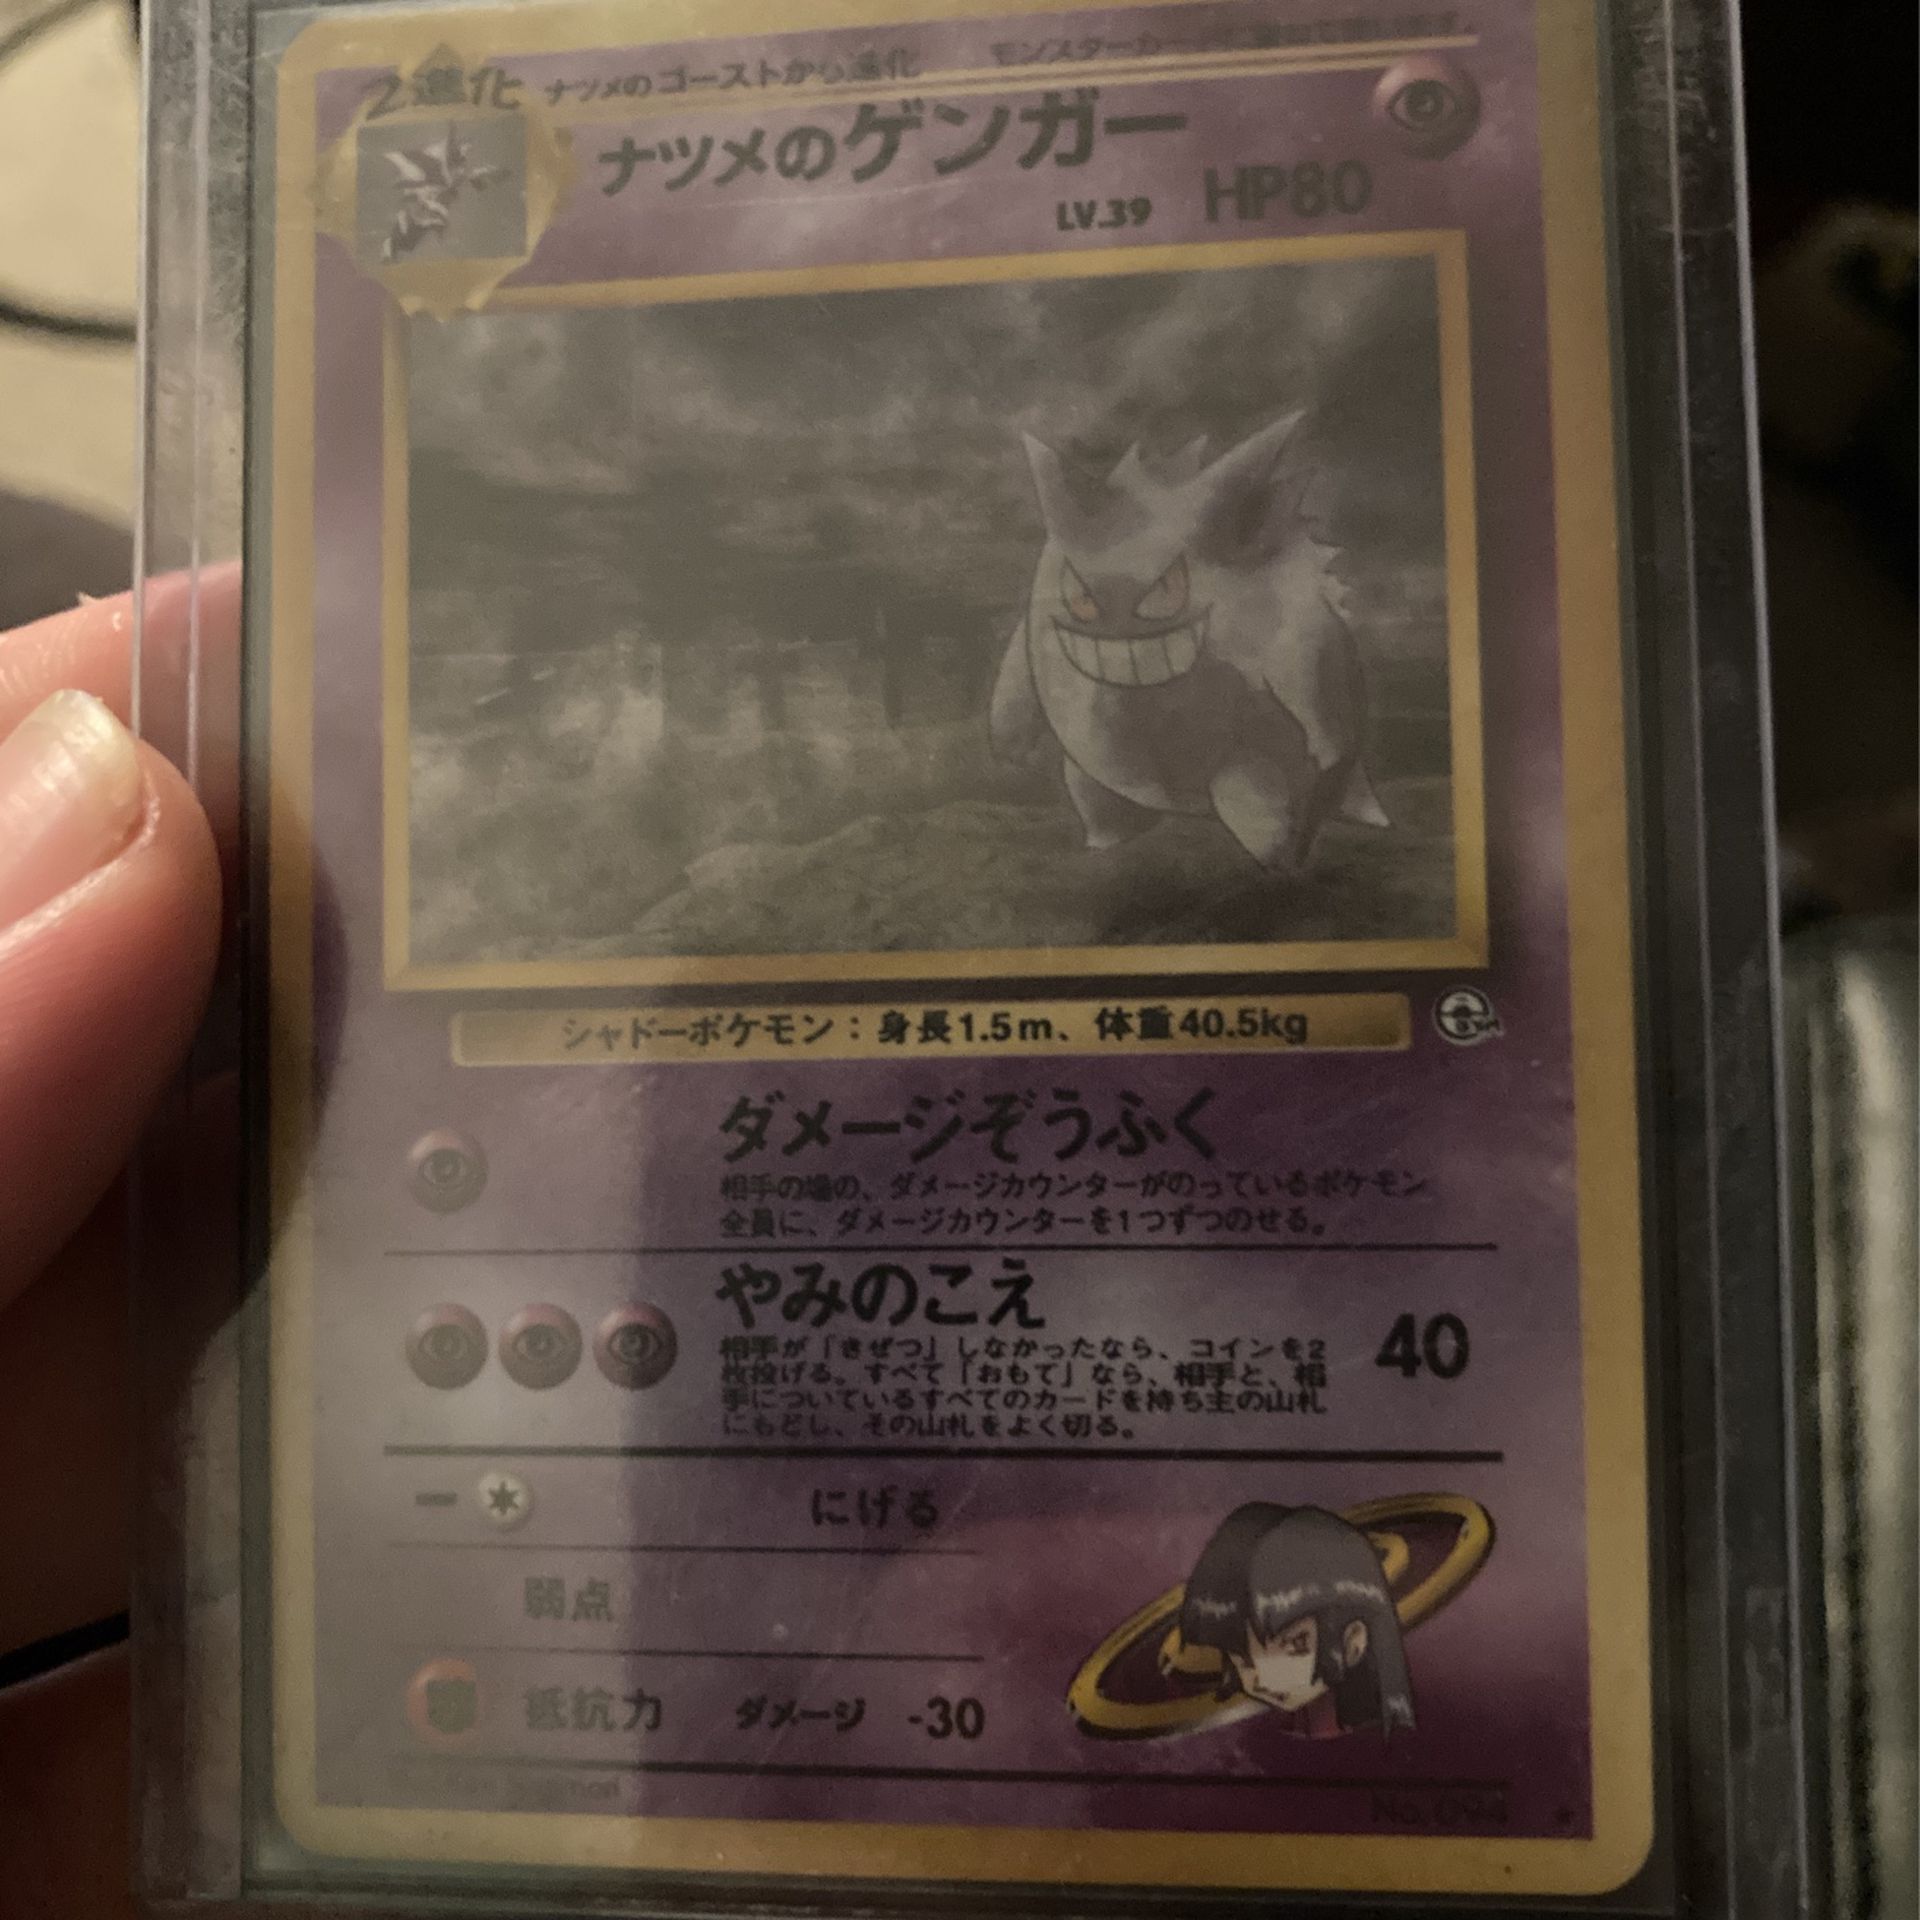 Gengar EX's full art, mega, and shiny m Gengar (pokemon cards) for Sale in  Fairfield, CA - OfferUp